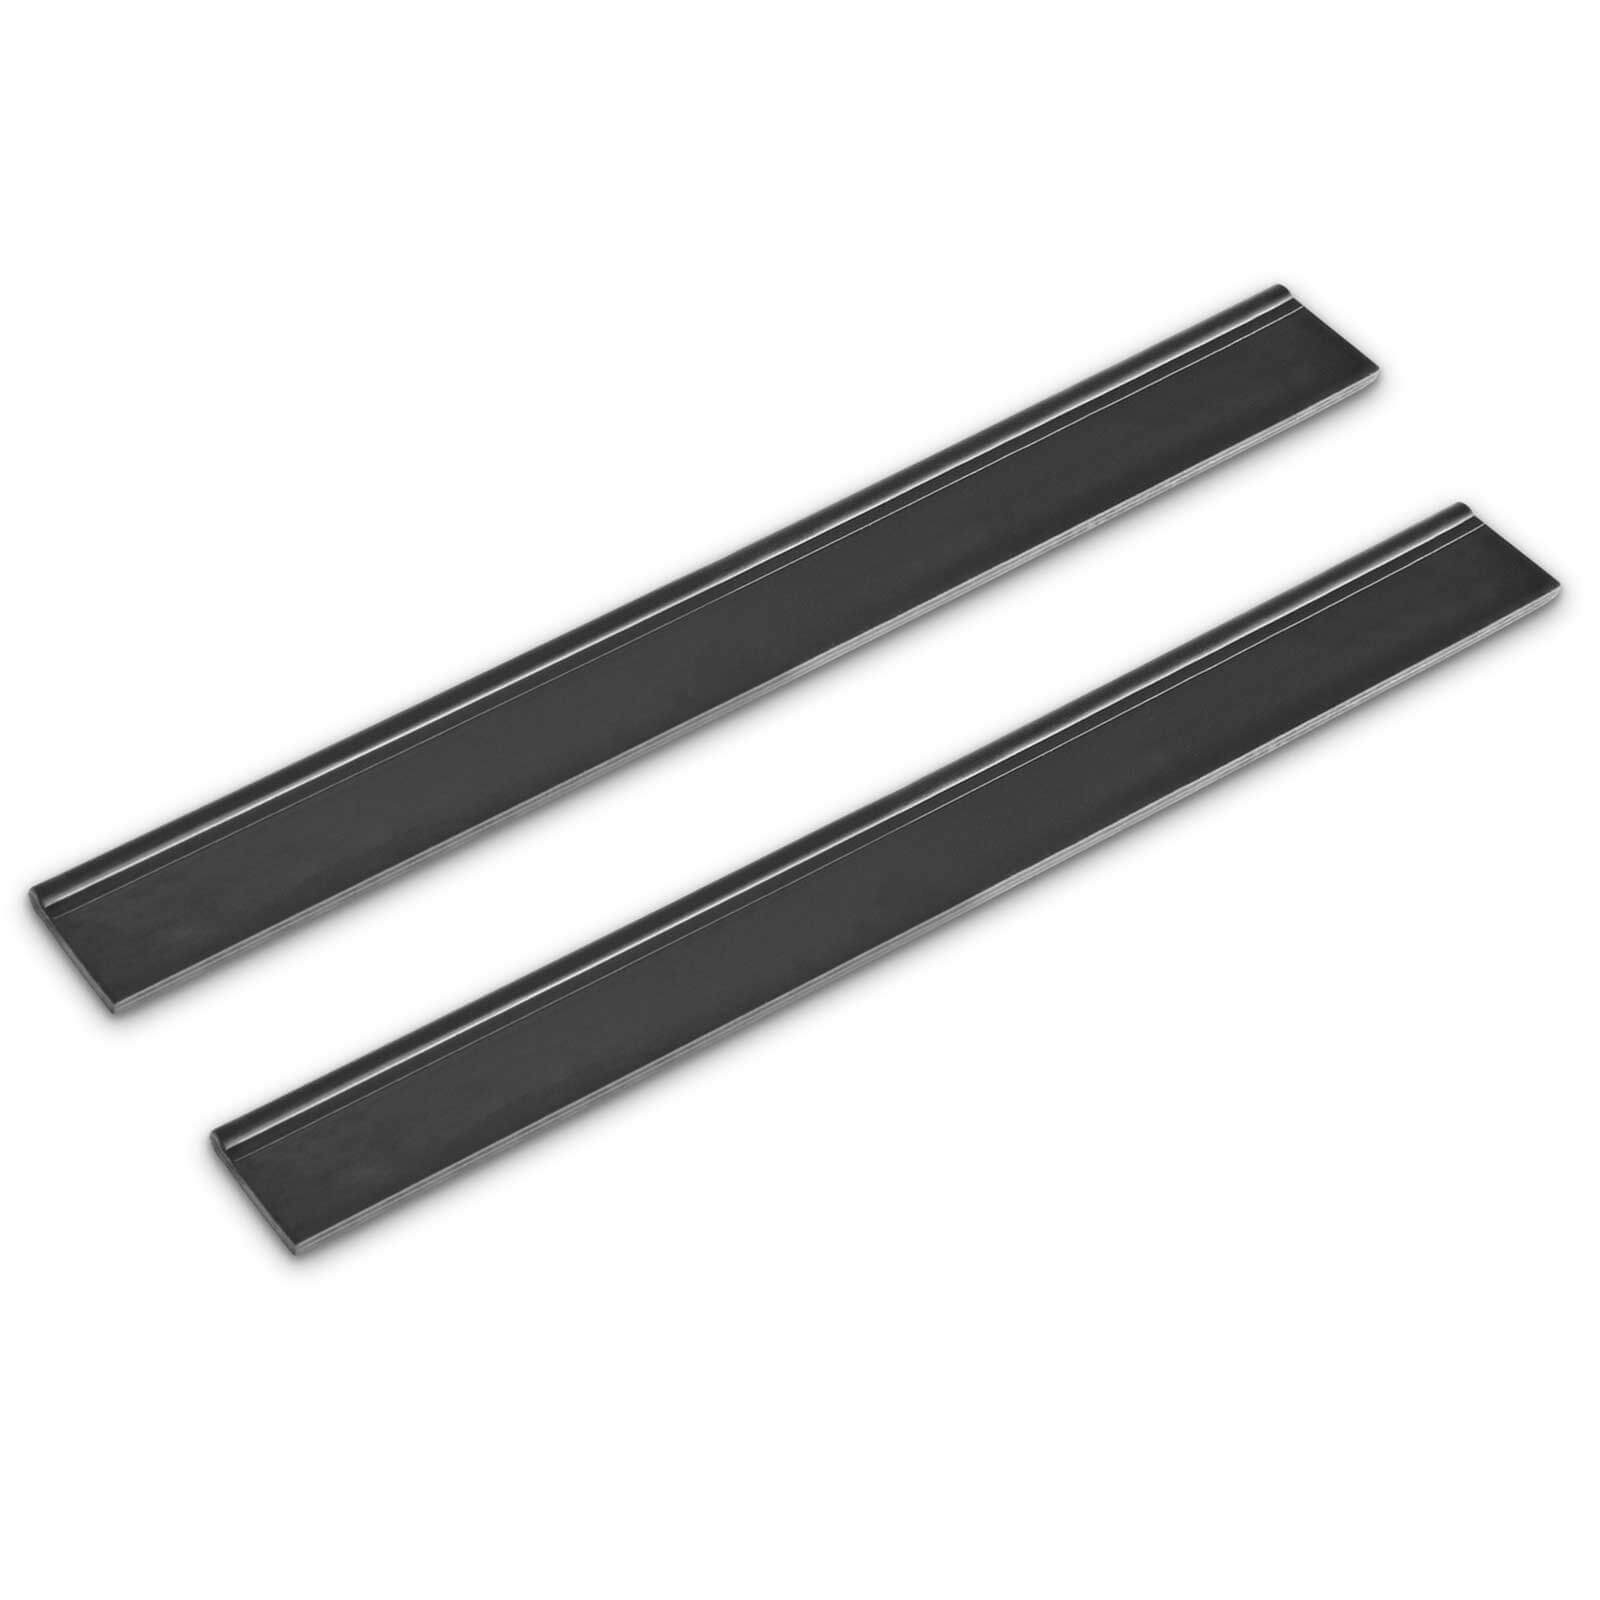 Photo of Karcher Suction Lips 170mm For Wv 2 - 5 Window Vacs Pack Of 2